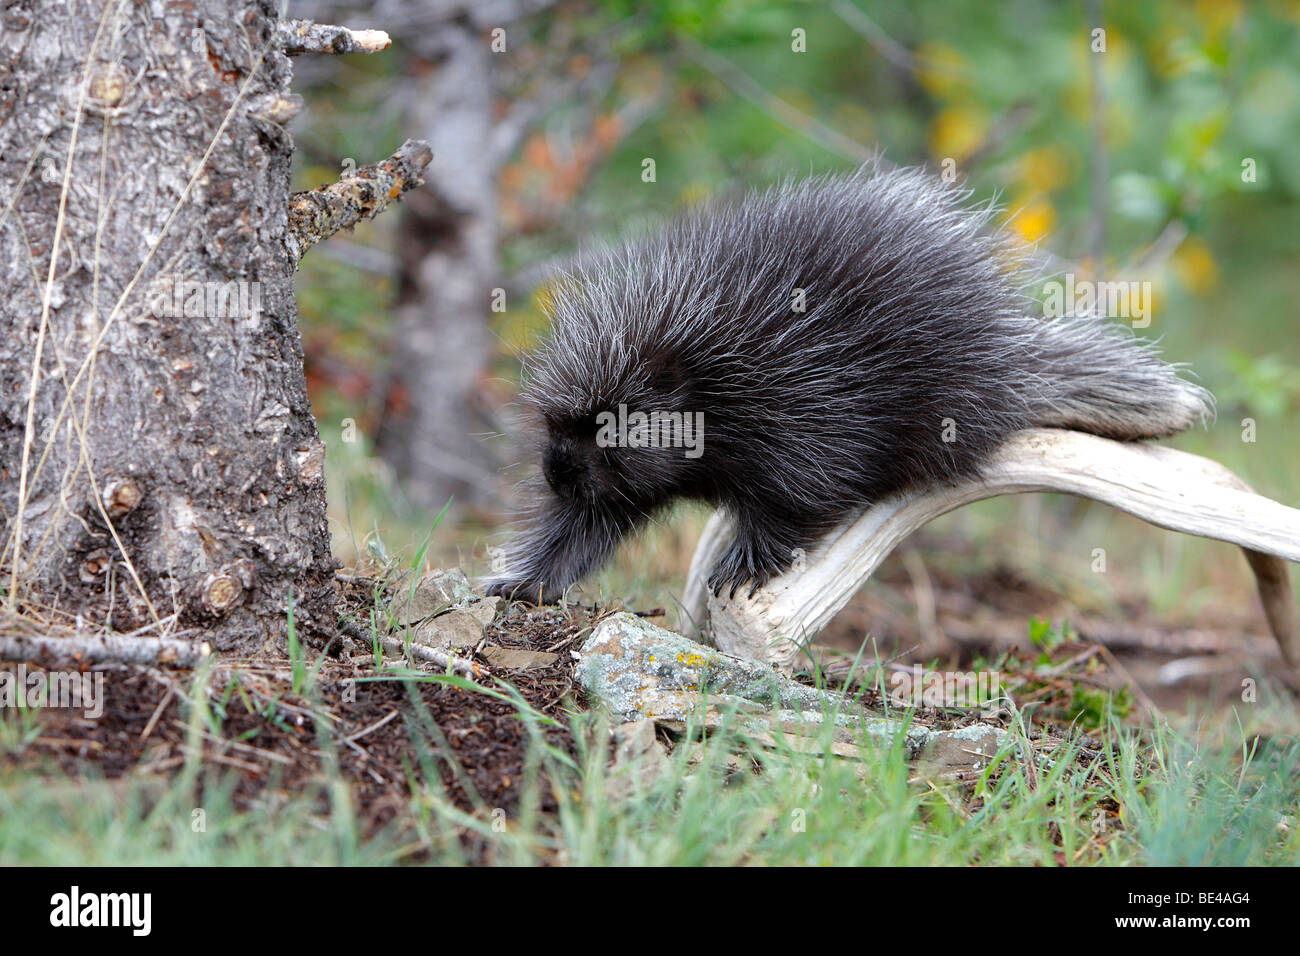 New World Porcupine, North American Porcupine (Erethizon dorsatum). Youngster walking on the ground. Stock Photo